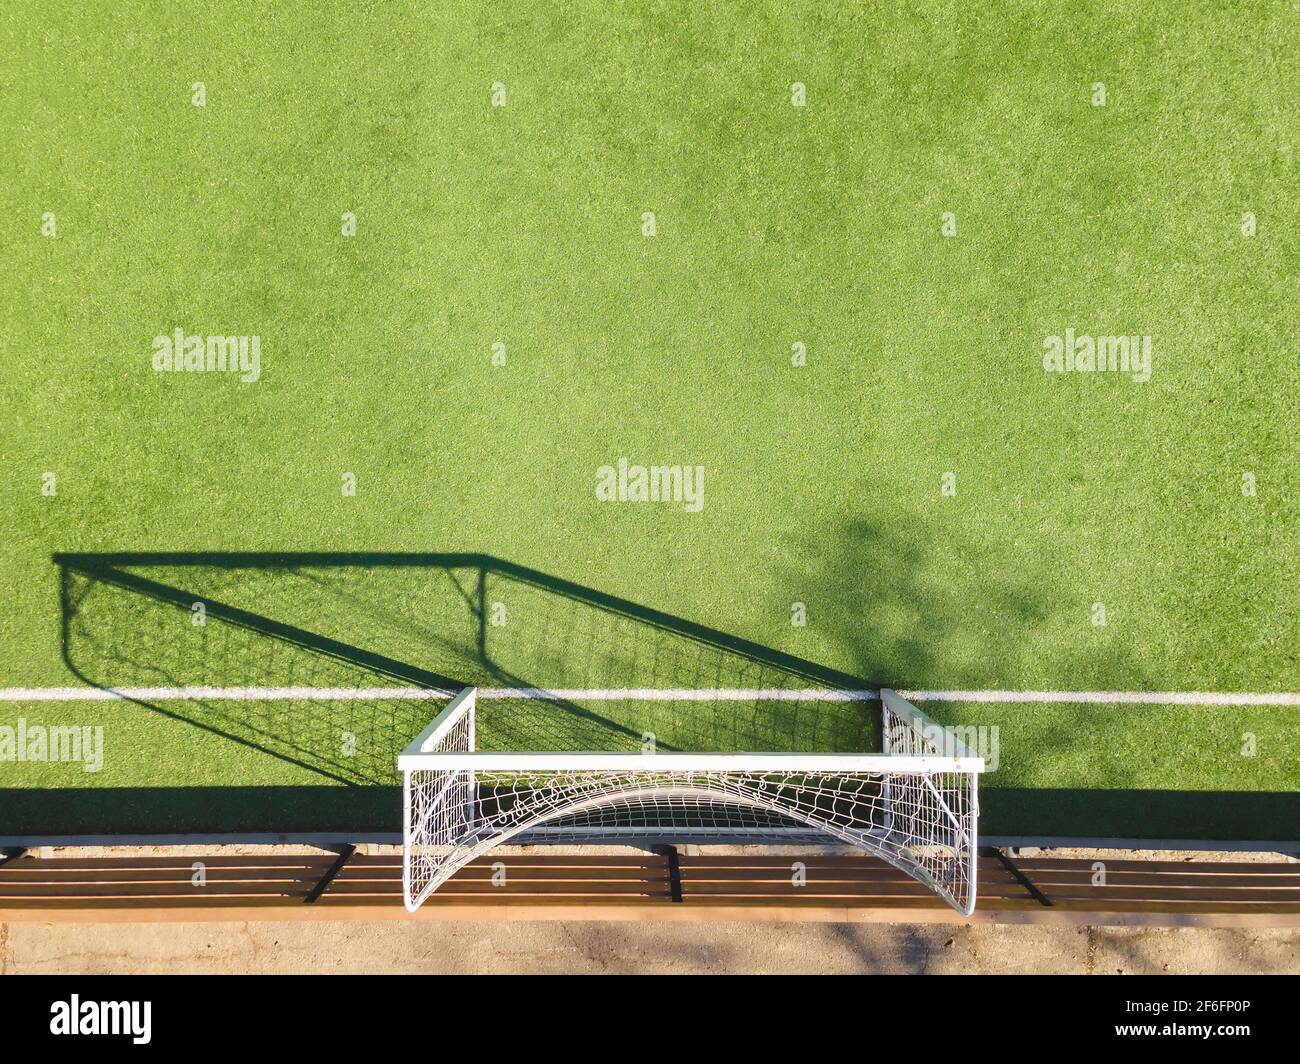 Green Soccer Court Detail .Outdoor sport ground with green surface for playing football  or soccer  in urban area, detail Stock Photo